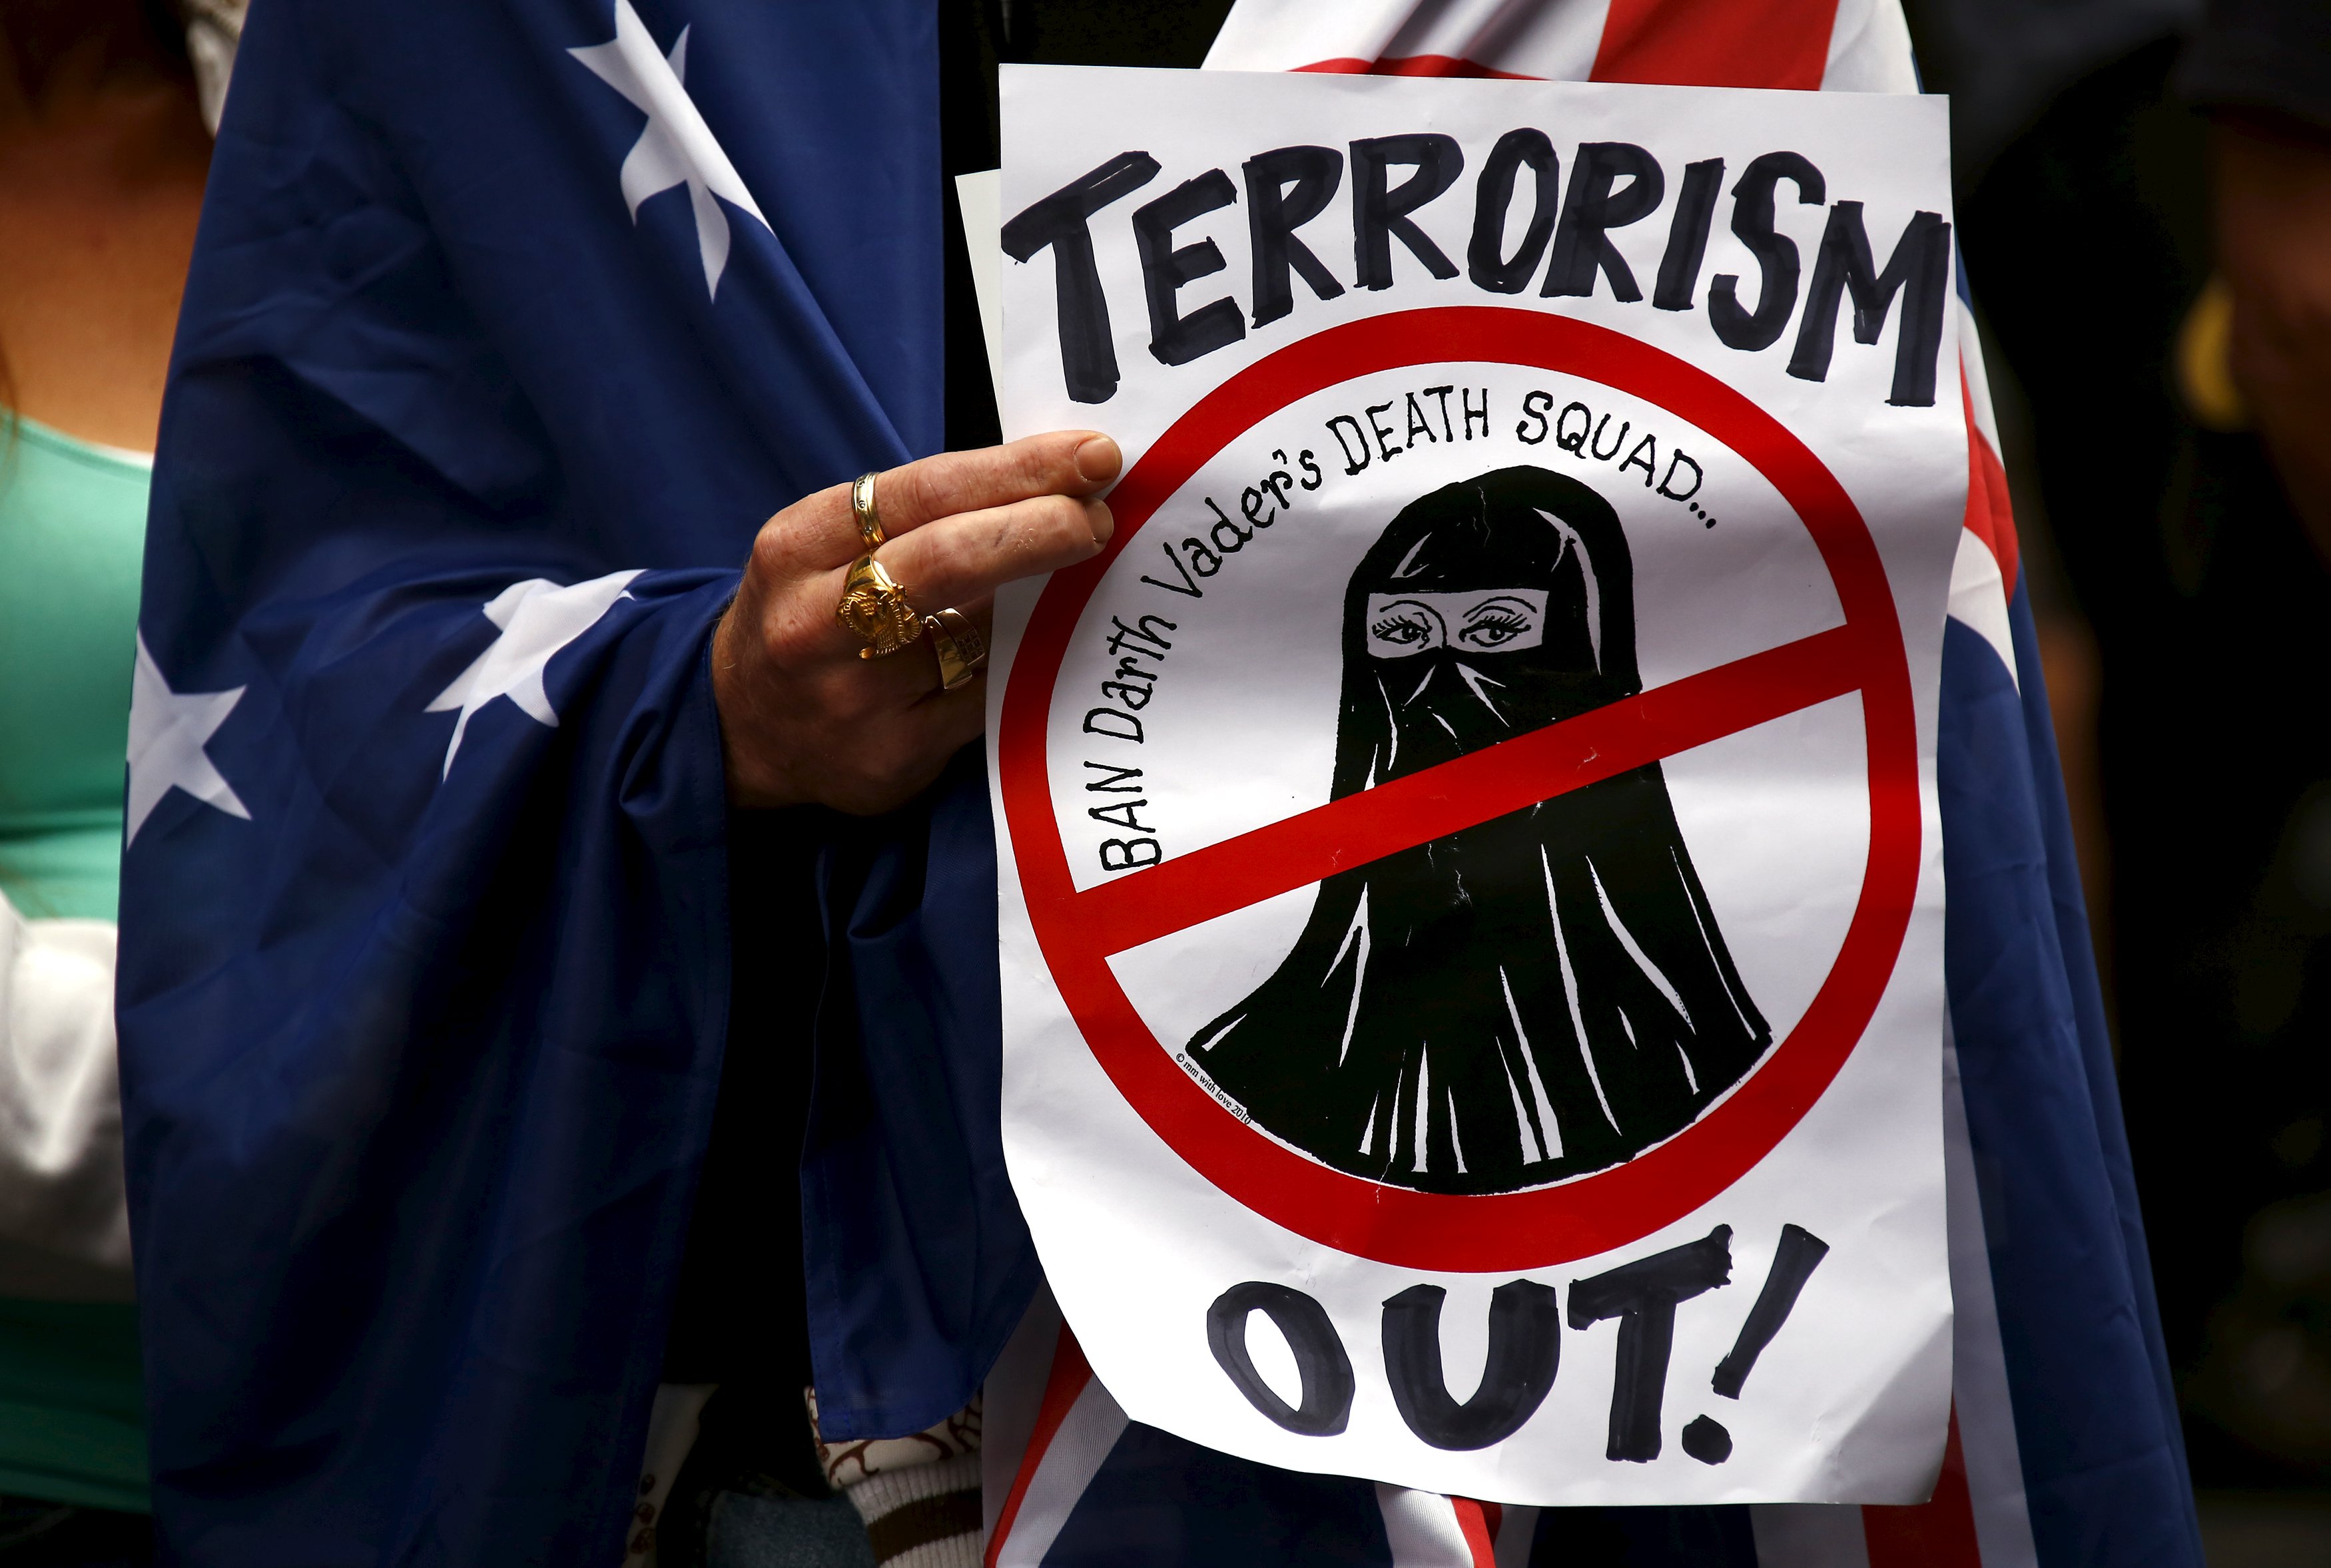 An anti-Islam protester at a separate rally easlier this year. Islamophobia has surged in Australia in recent years.